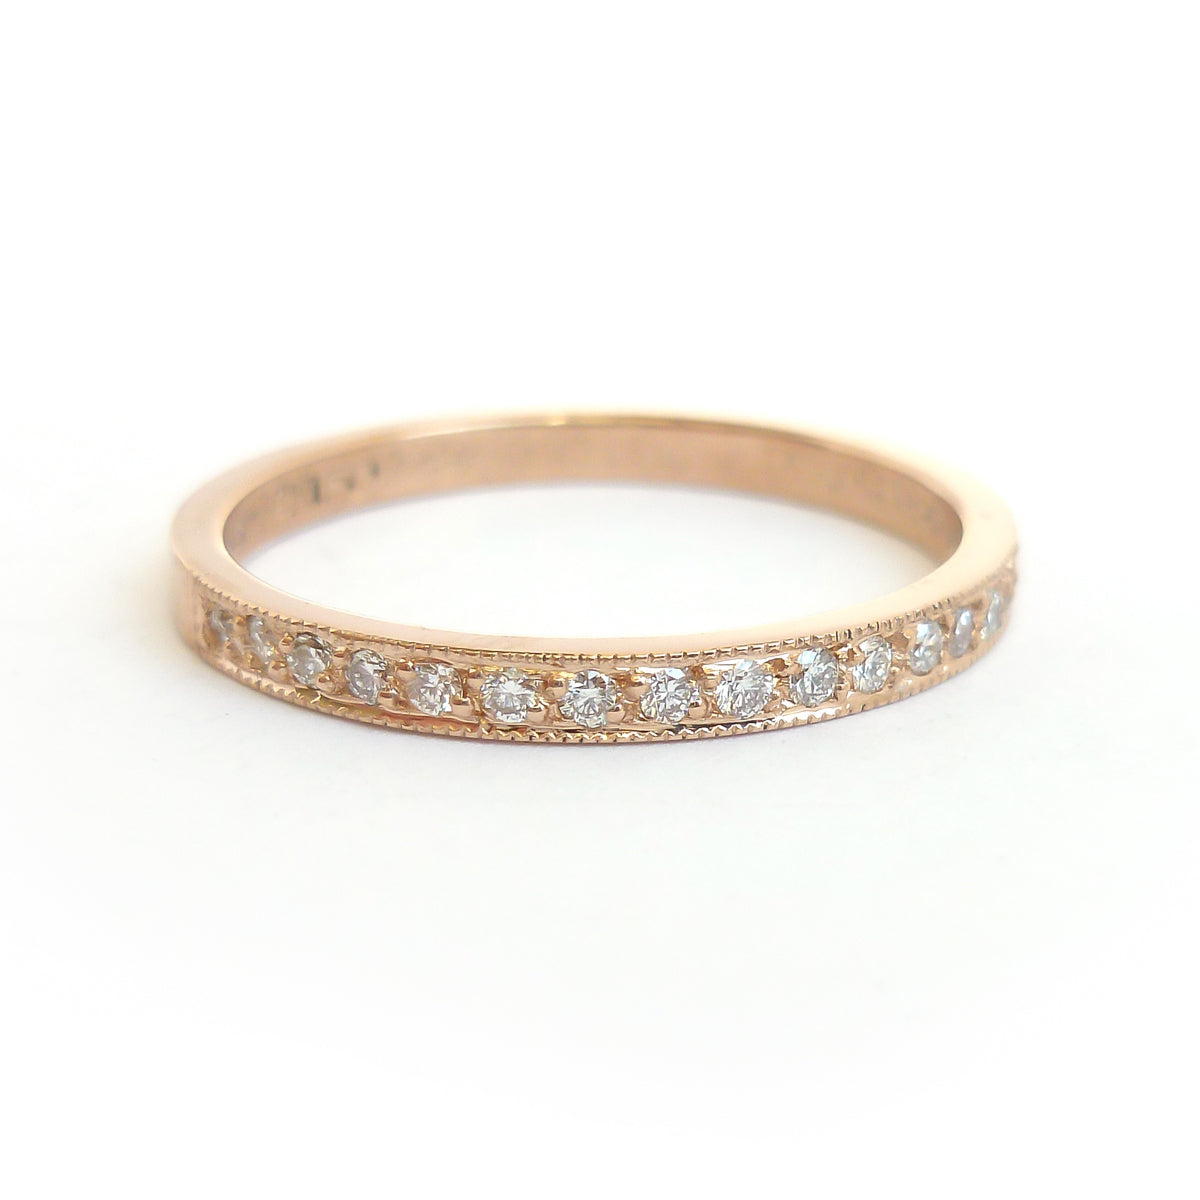 Contemporary rose gold and pear shaped imperial topaz stacking interlocking ring set.